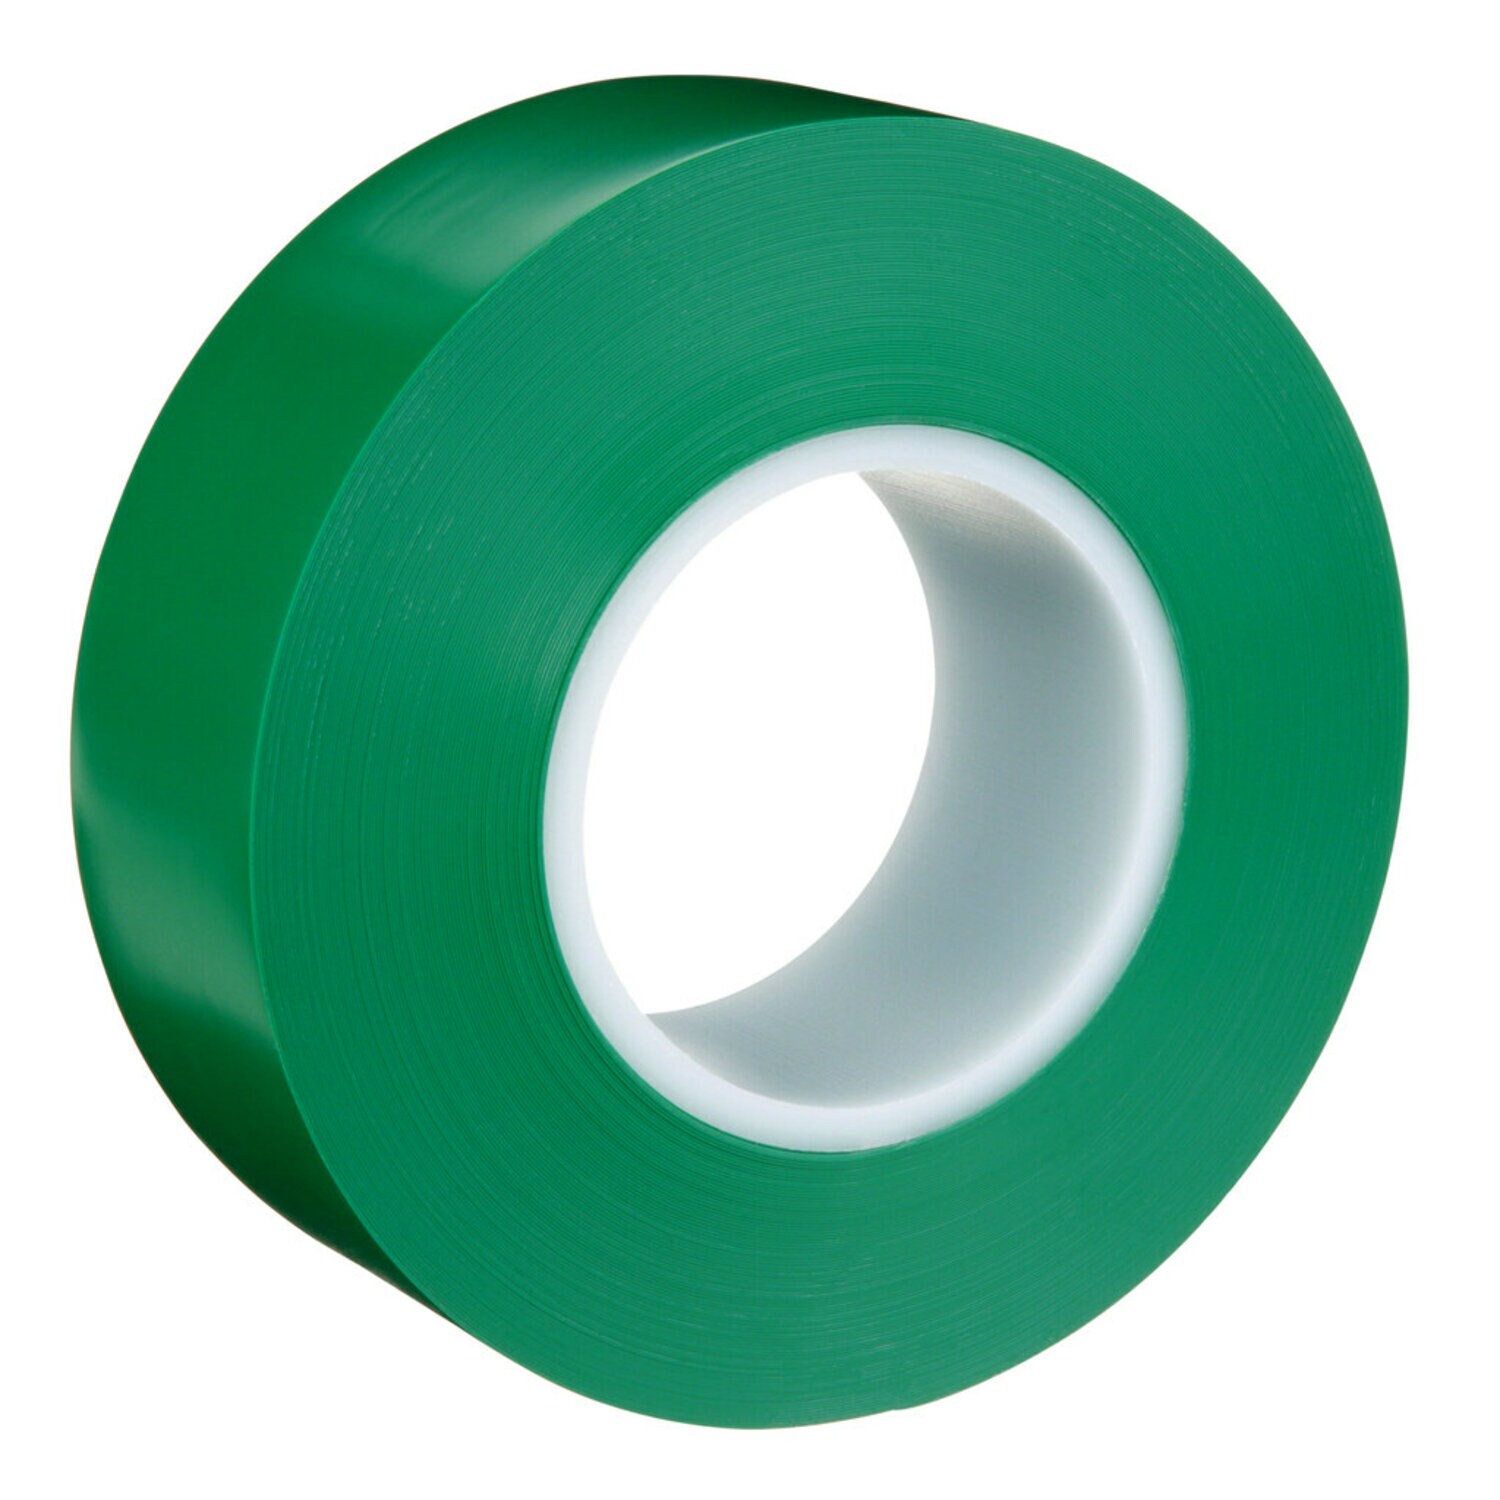 7100254034 - 3M Durable Floor Marking Tape 971, Green, 2 in x 36 yd, 17 mil, 6 Rolls/Case, Individually Wrapped Conveniently Packaged